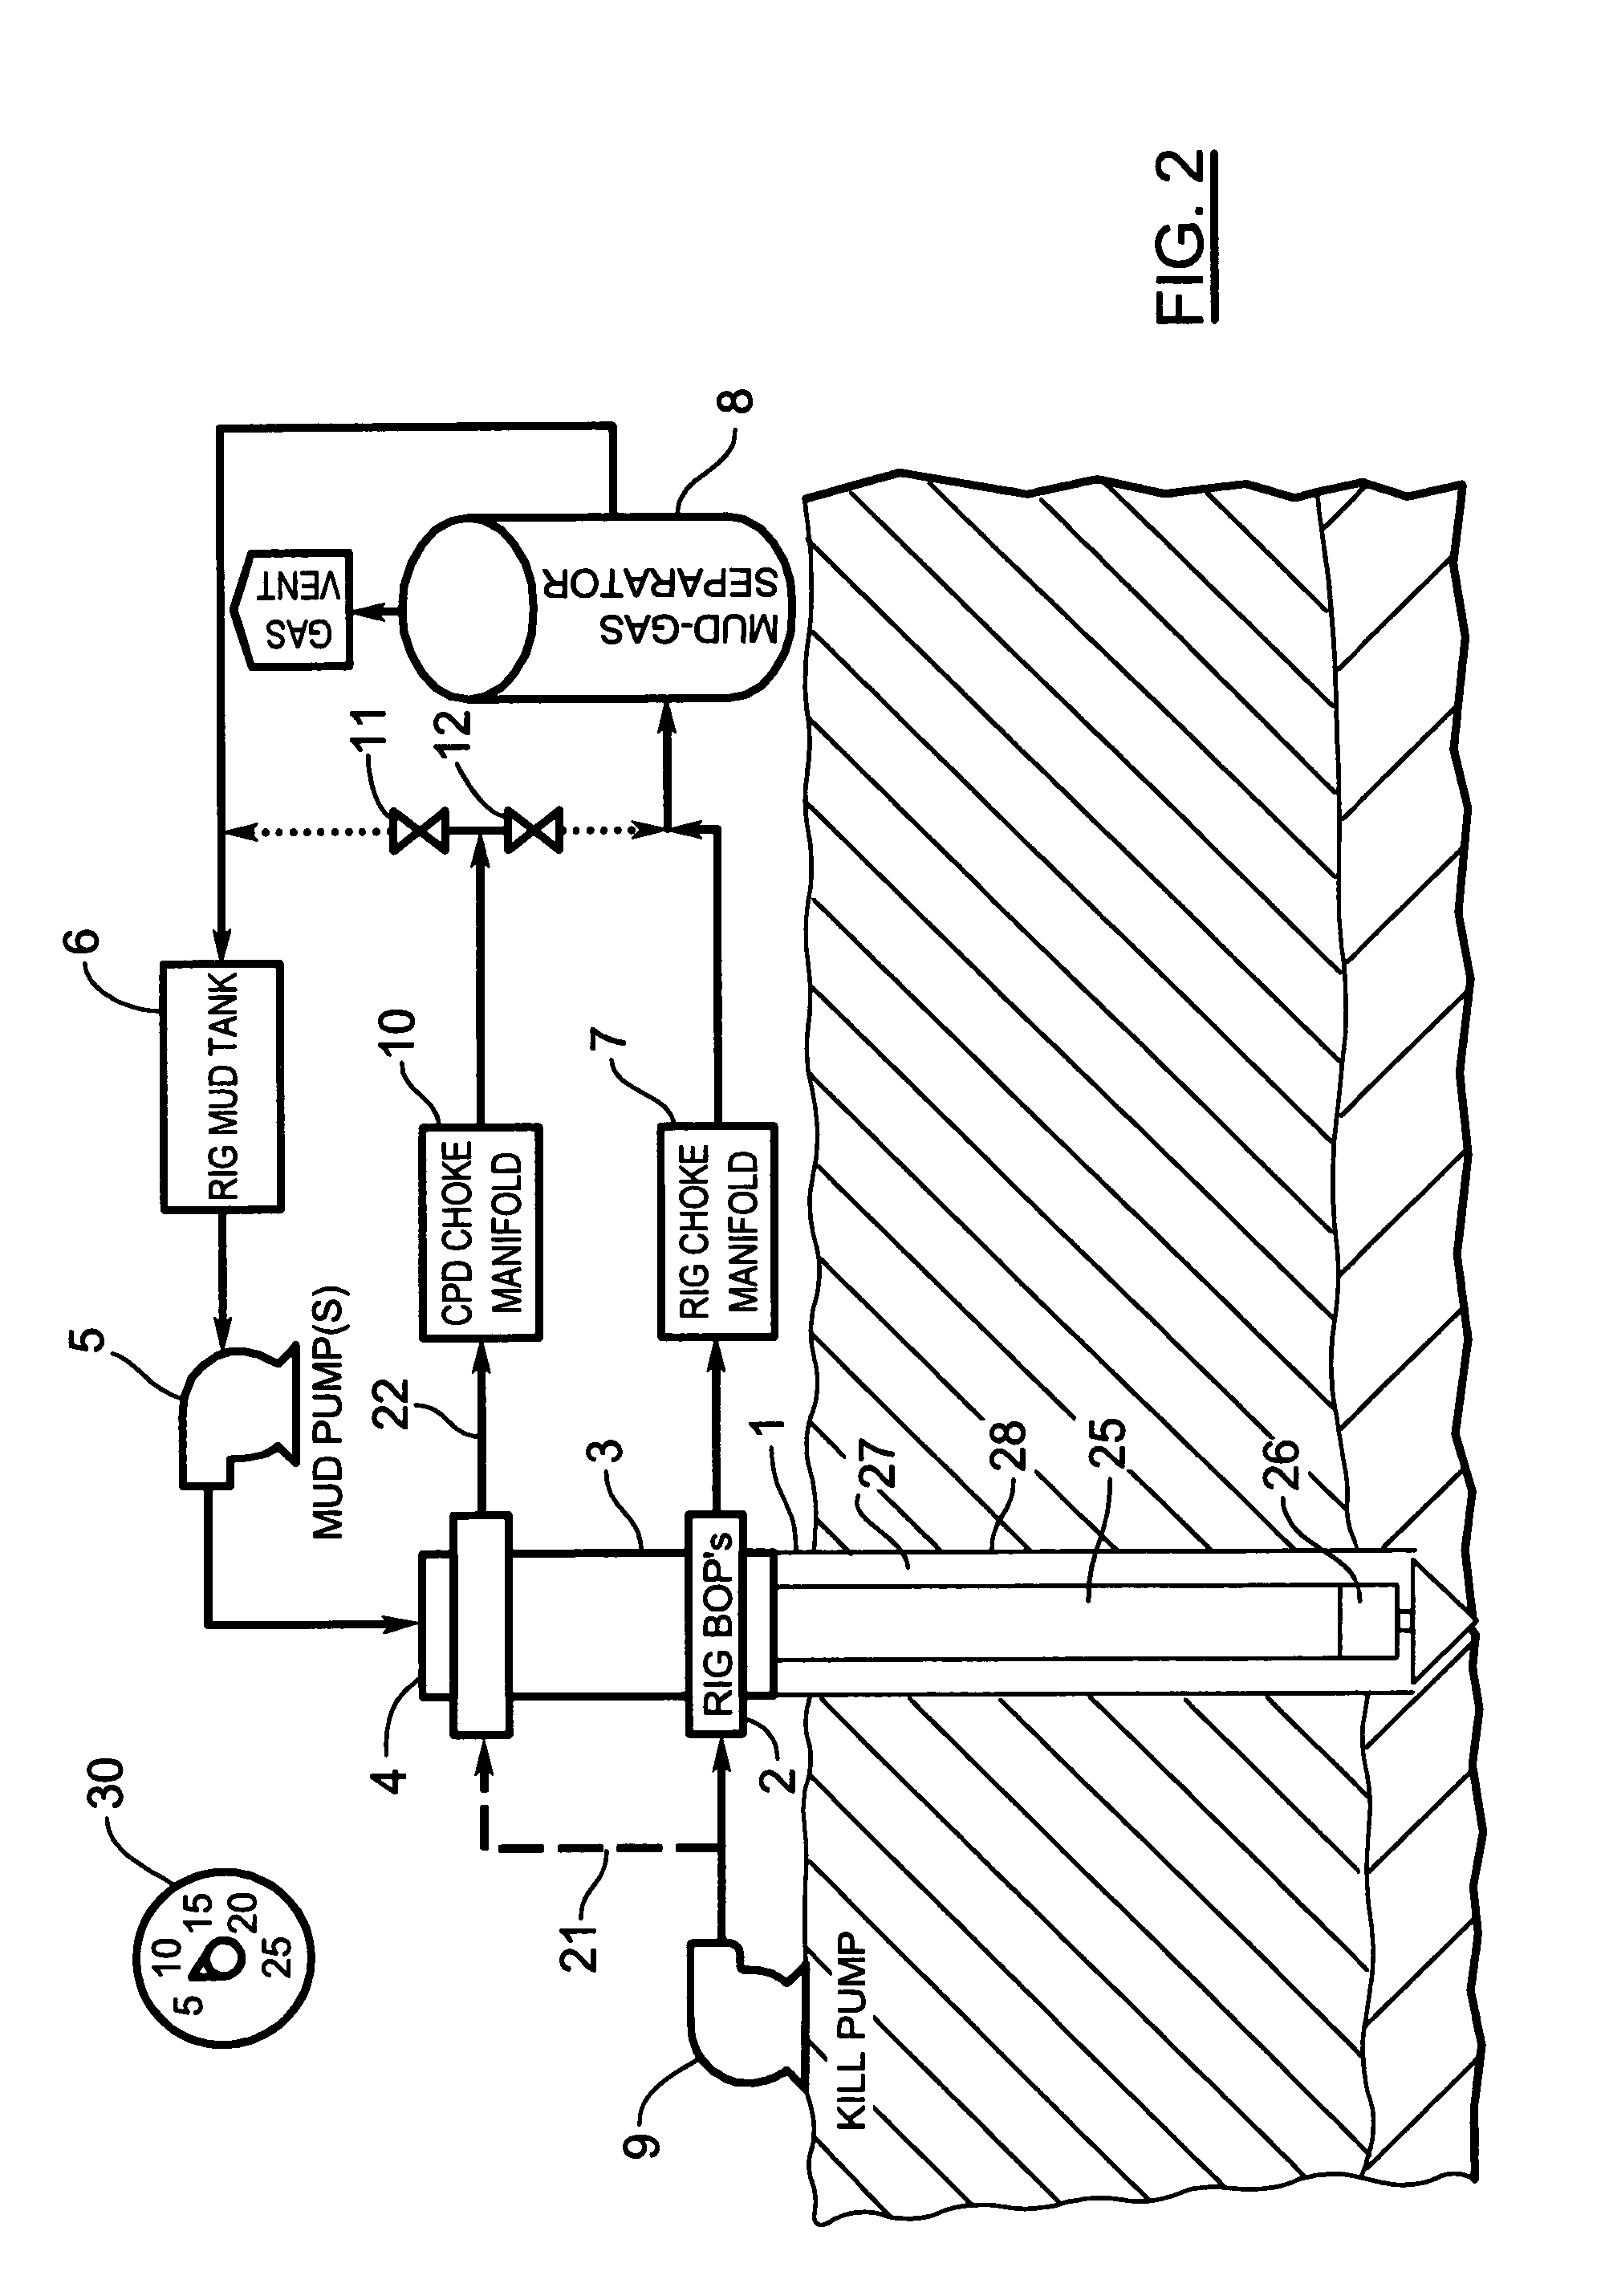 Method of dynamically controlling open hole pressure in a wellbore using wellhead pressure control